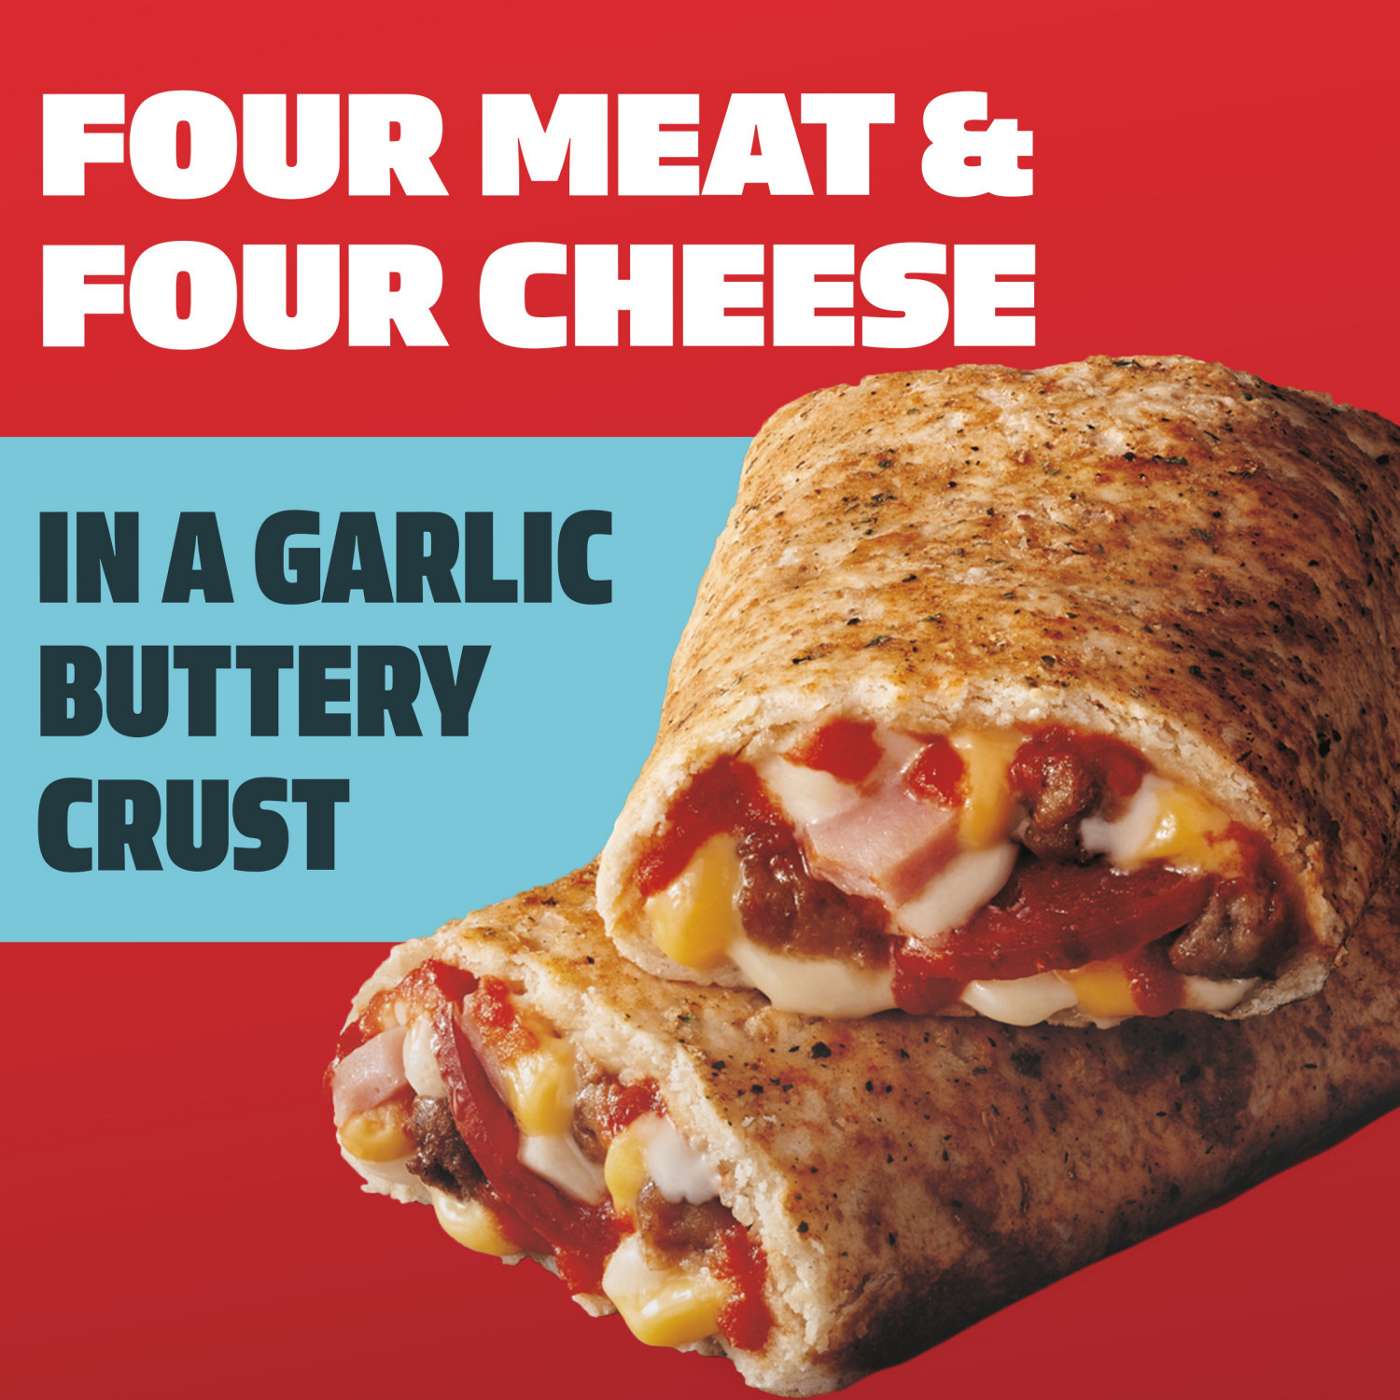 Hot Pockets 4 Meat & 4 Cheese Pizza Frozen Sandwiches - Garlic Buttery Crust; image 5 of 6